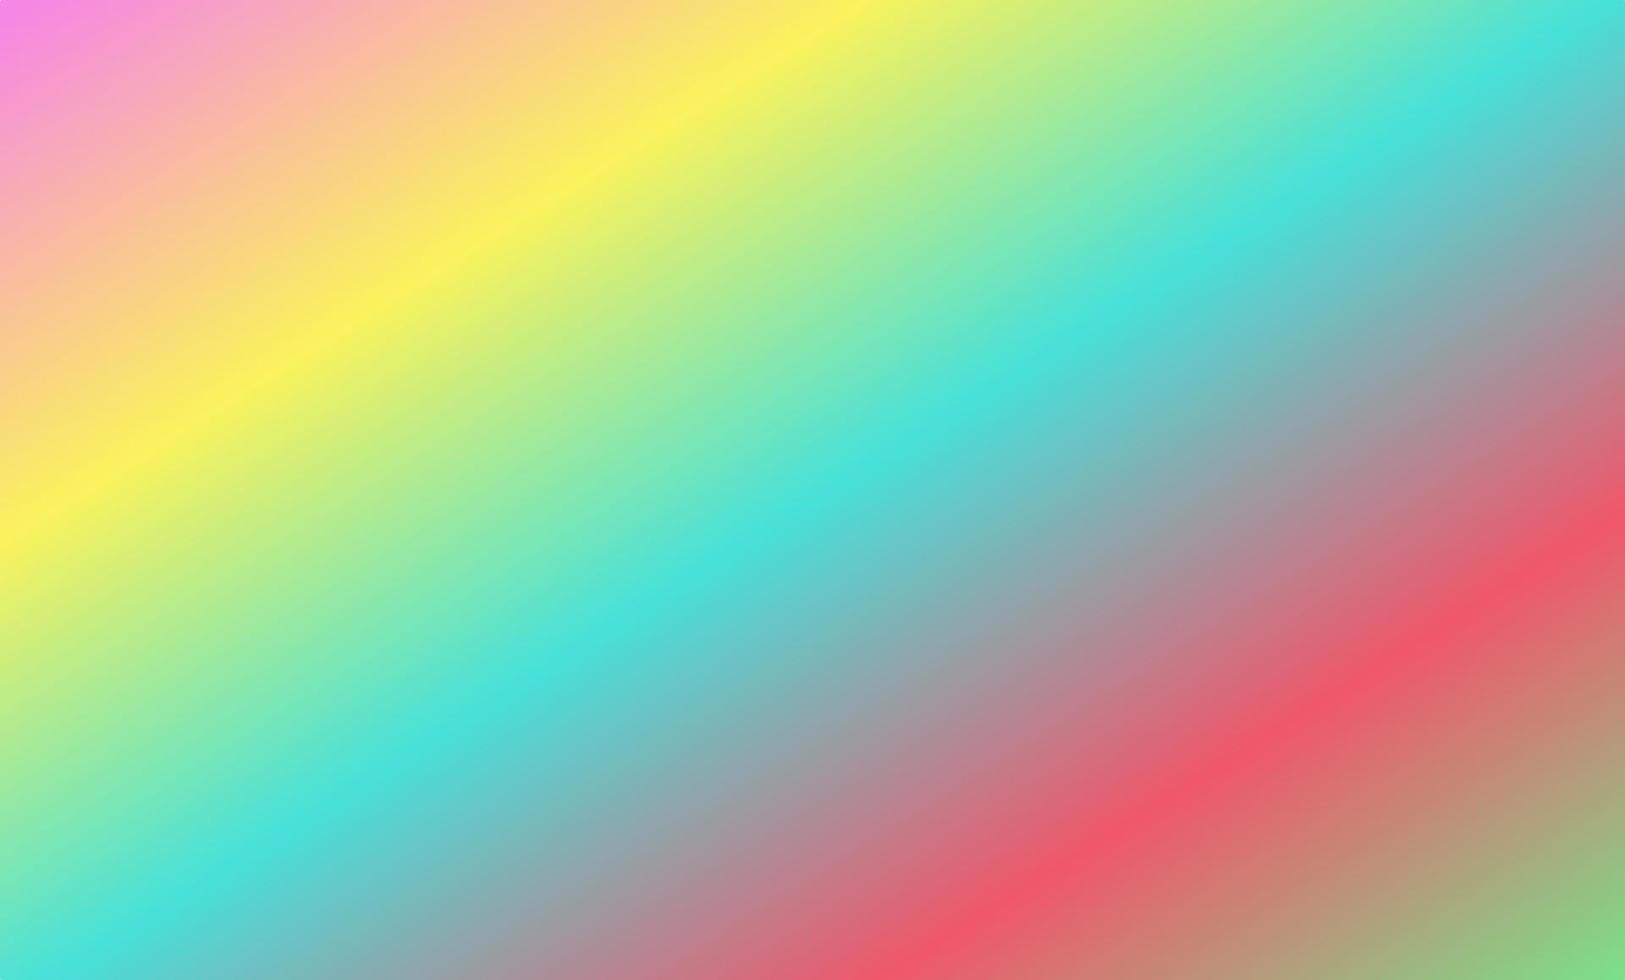 blurred abstract gradient background in colorful smooth icerah color illustration vector